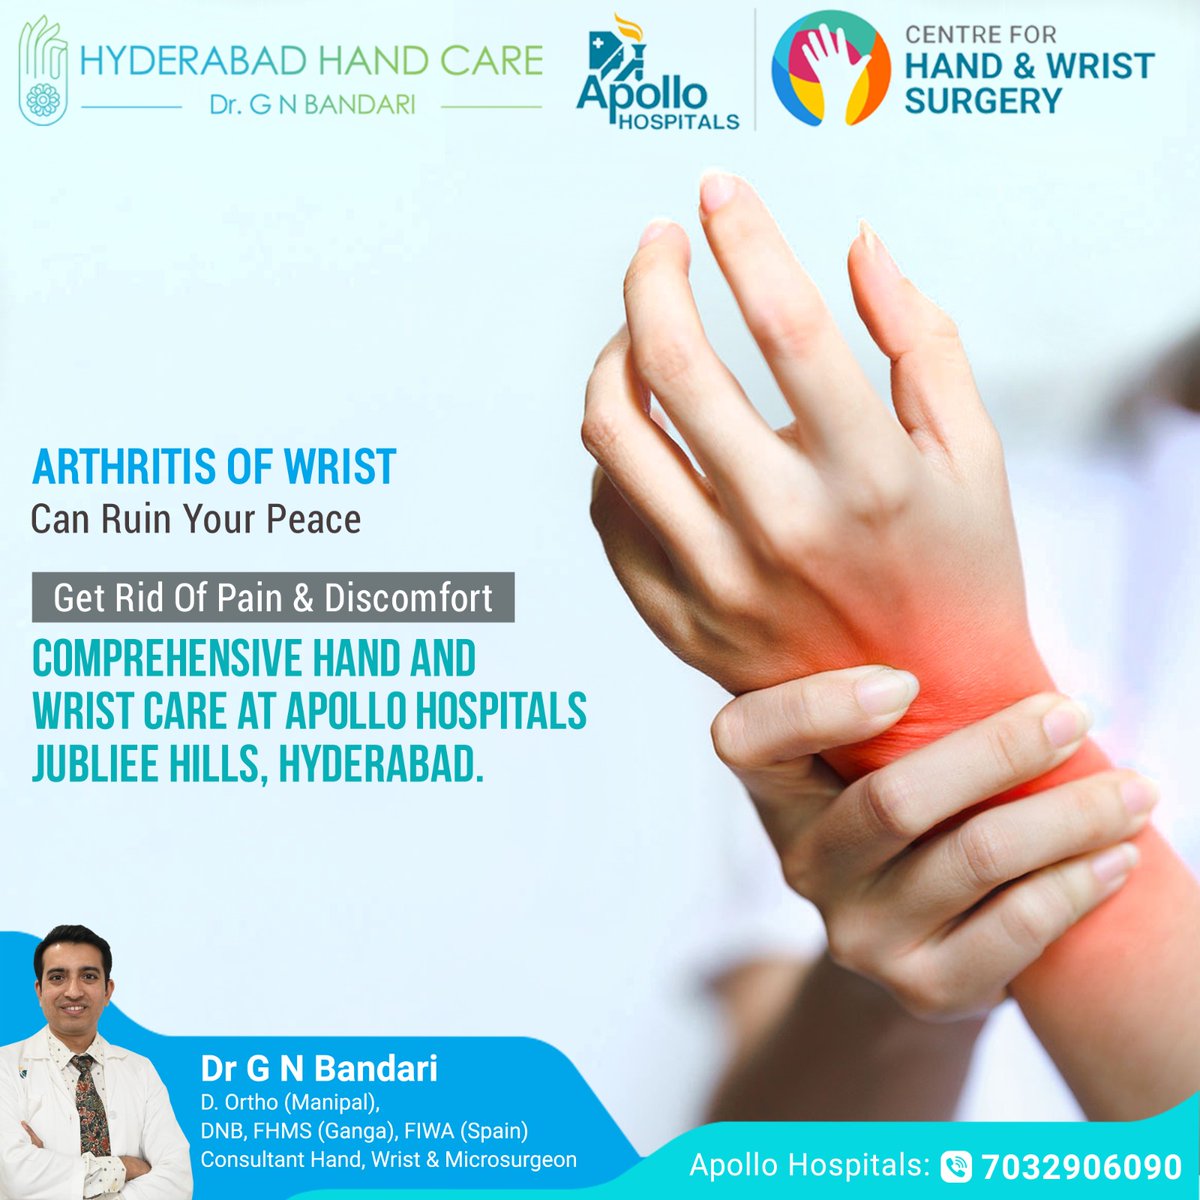 #Arthritis of #Wrist can ruin your Peace.
Get Rid of #Pain & #Discomfort.
Comprehensive Hand and Wrist care at #ApolloHospitals, #JubileeHills, #Hyderabad. Let us help you find relief.

For more visit :  
 hyderabadhandcare.com